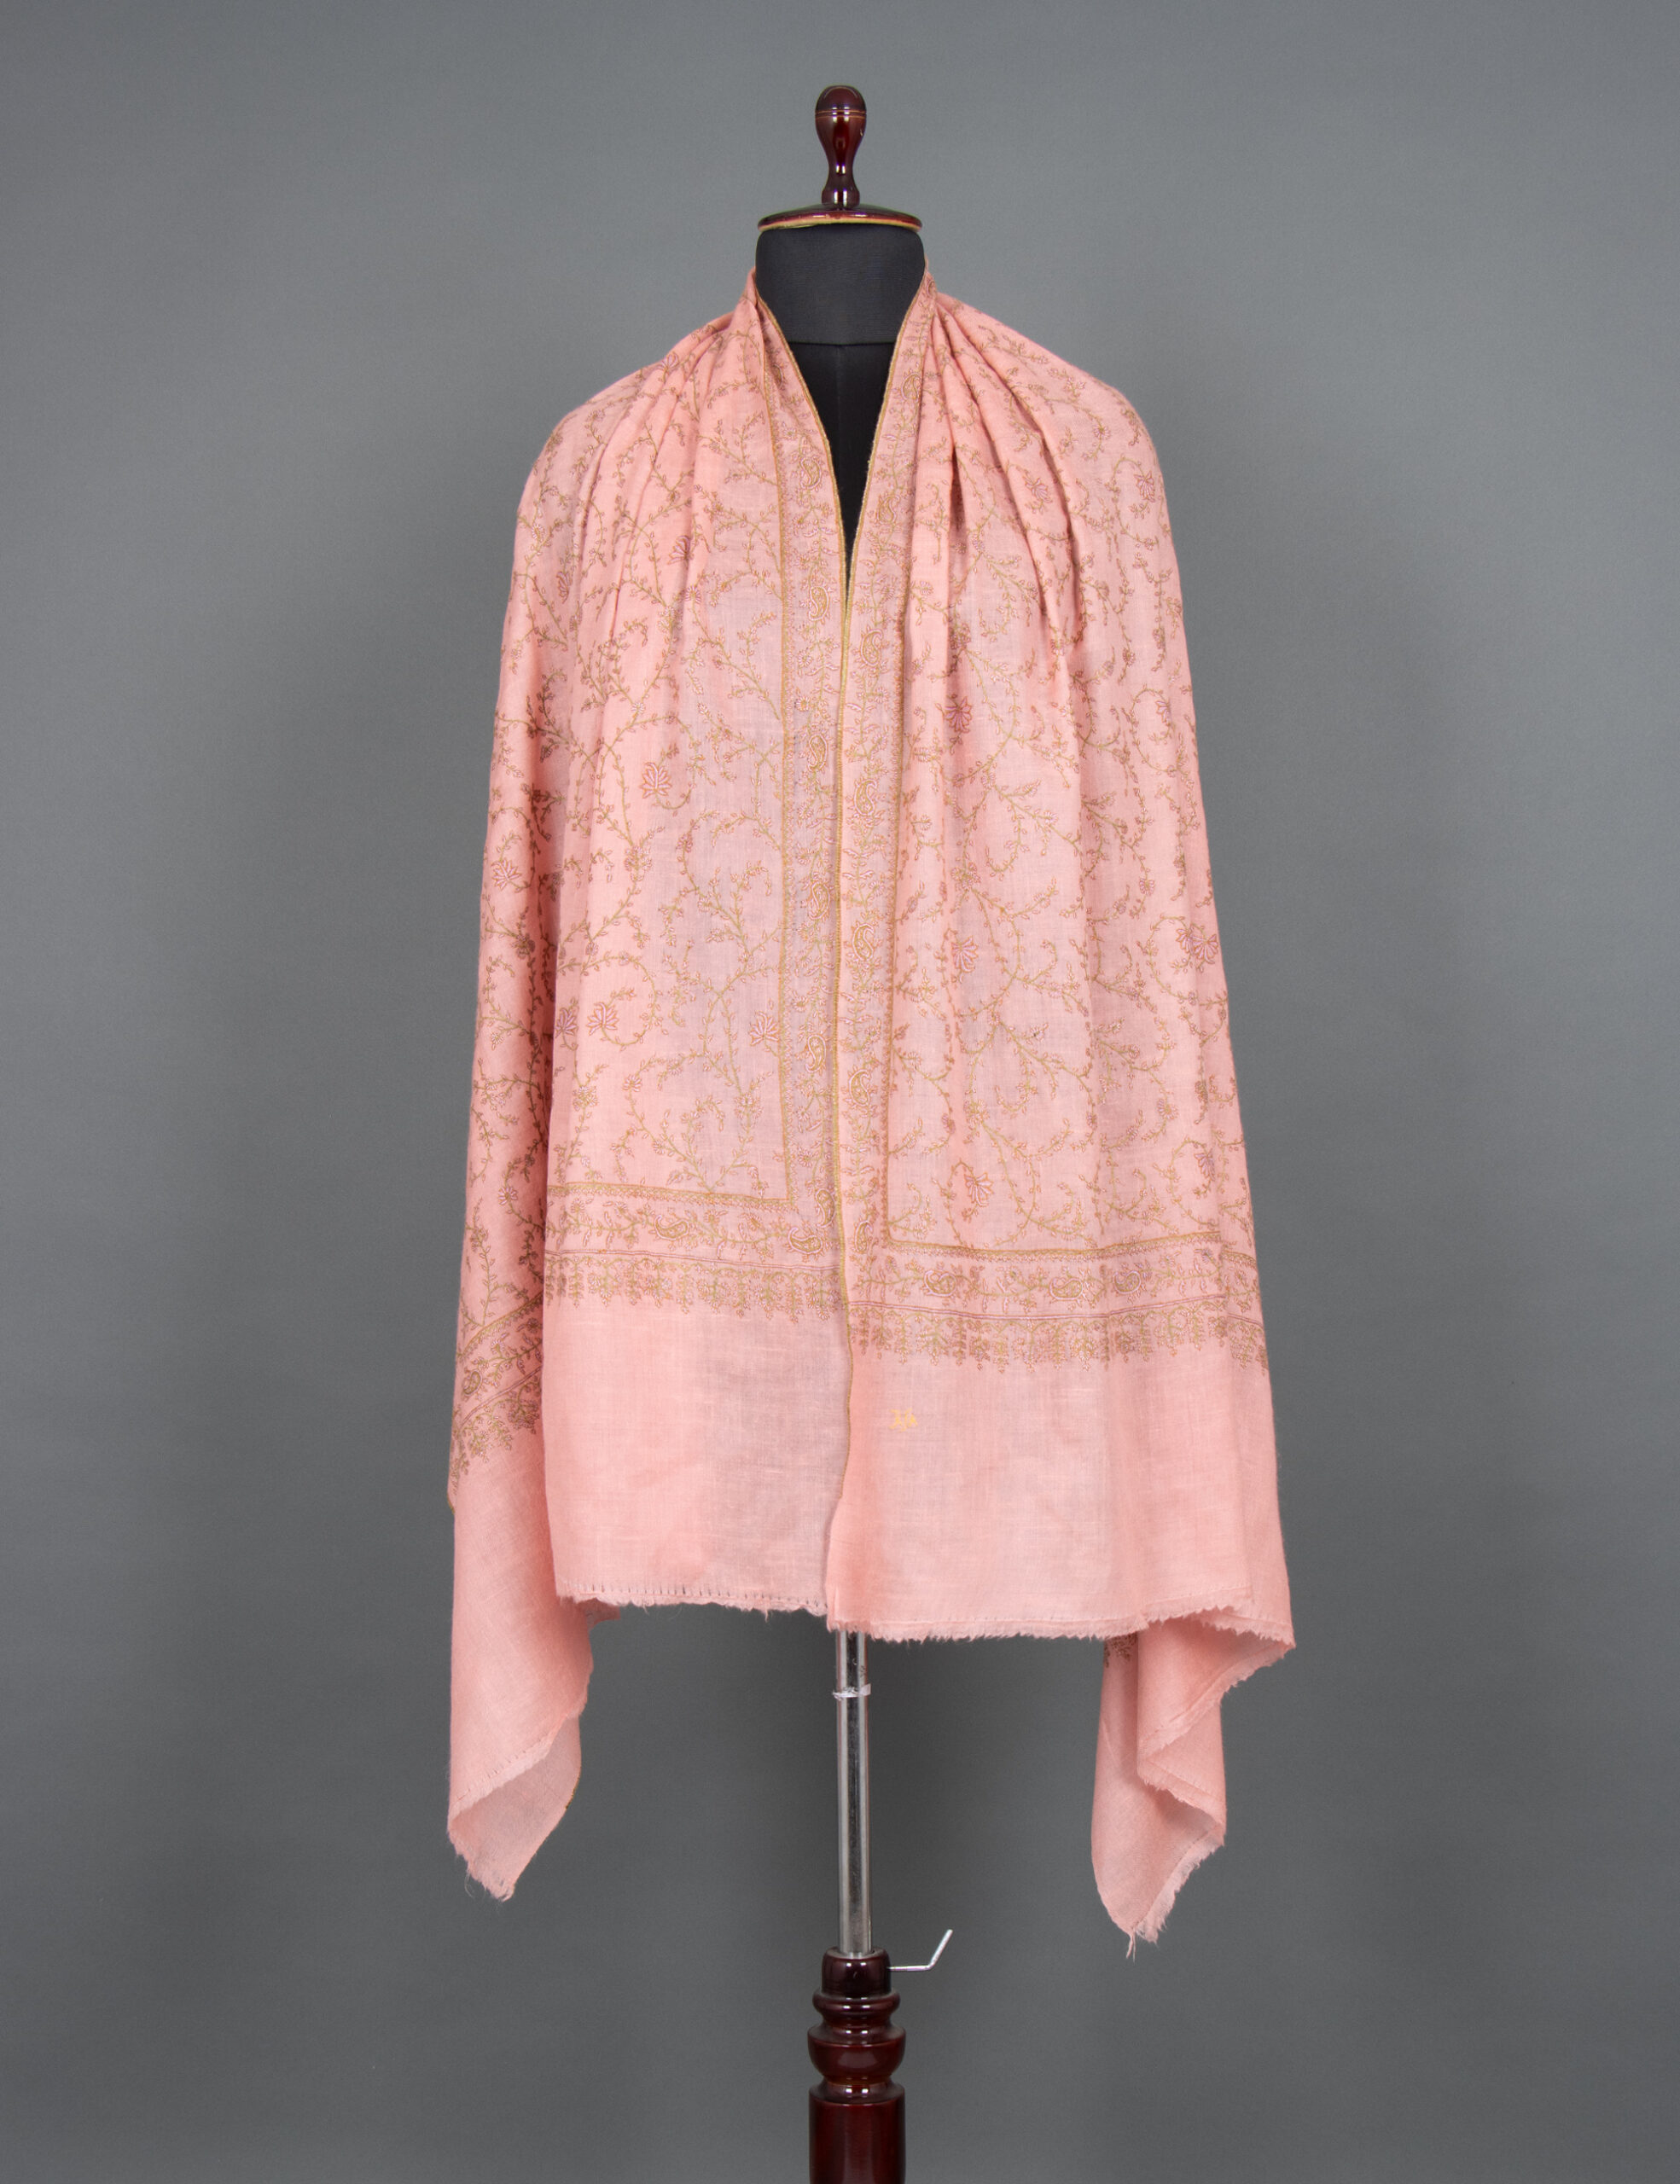 Soft Pink Embroidered Bliss: Graceful Pashmina Wrap